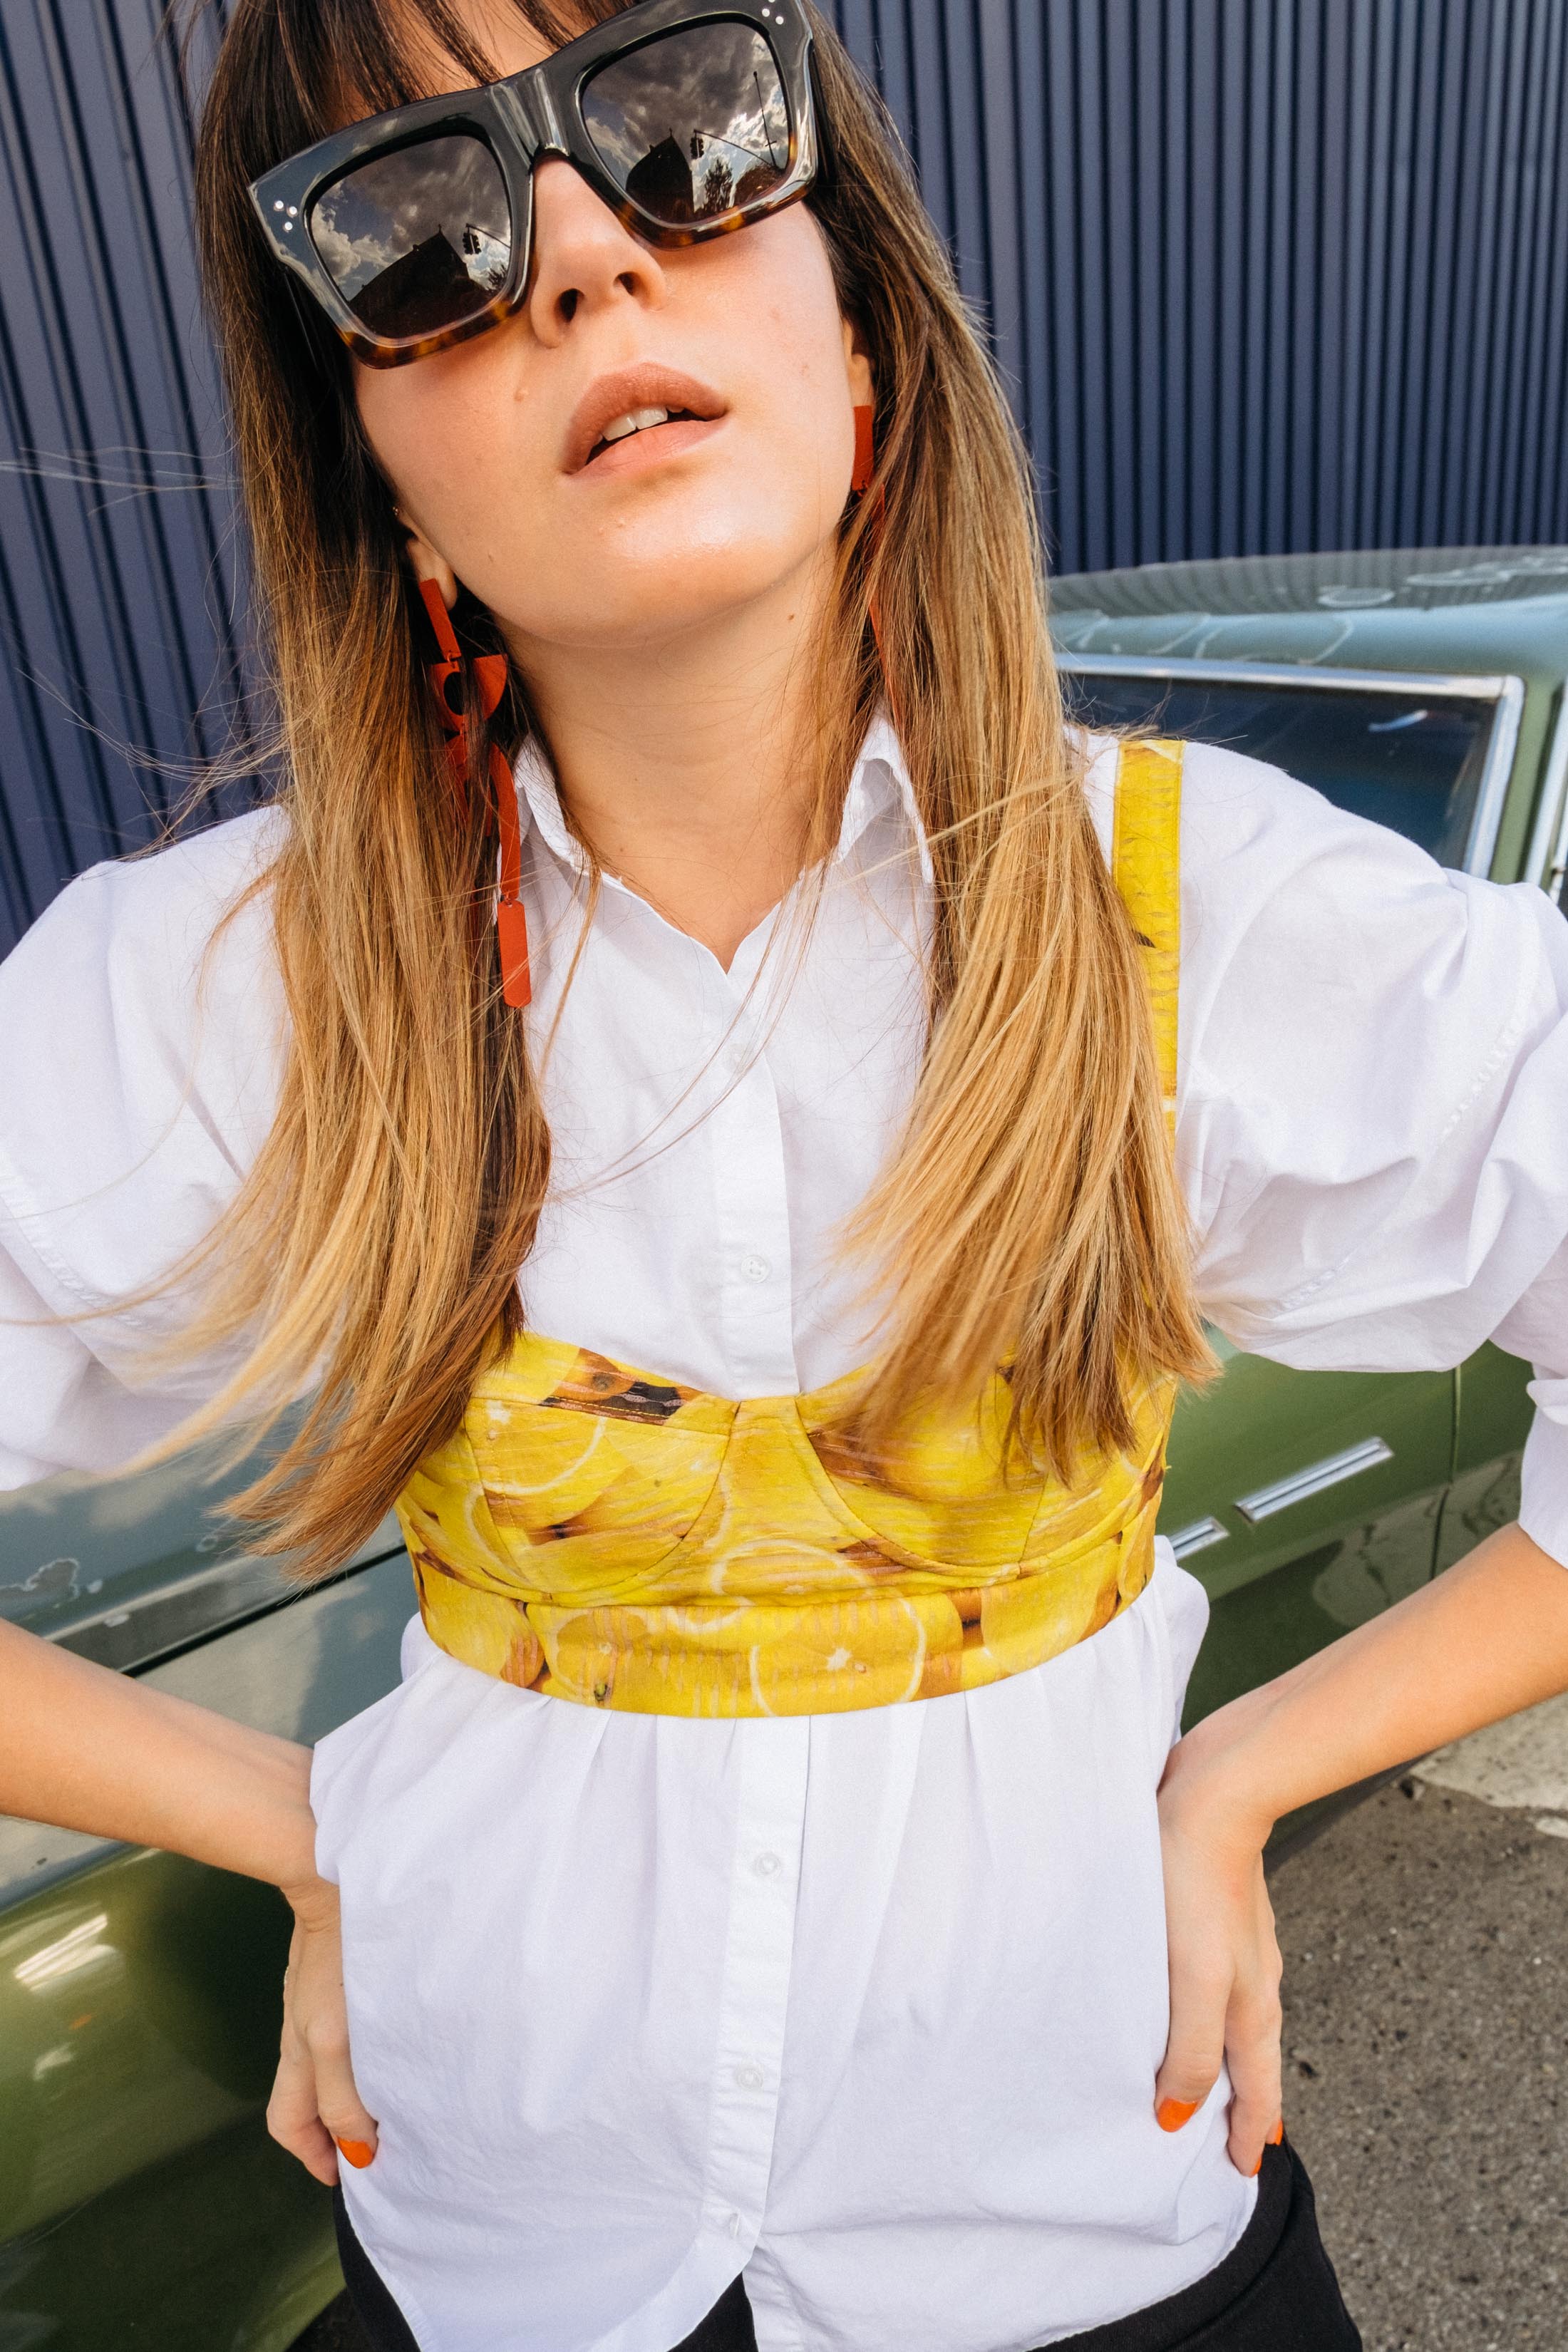 Alice & Olivia lemon print bustier top with a white button down shirt by Maristella